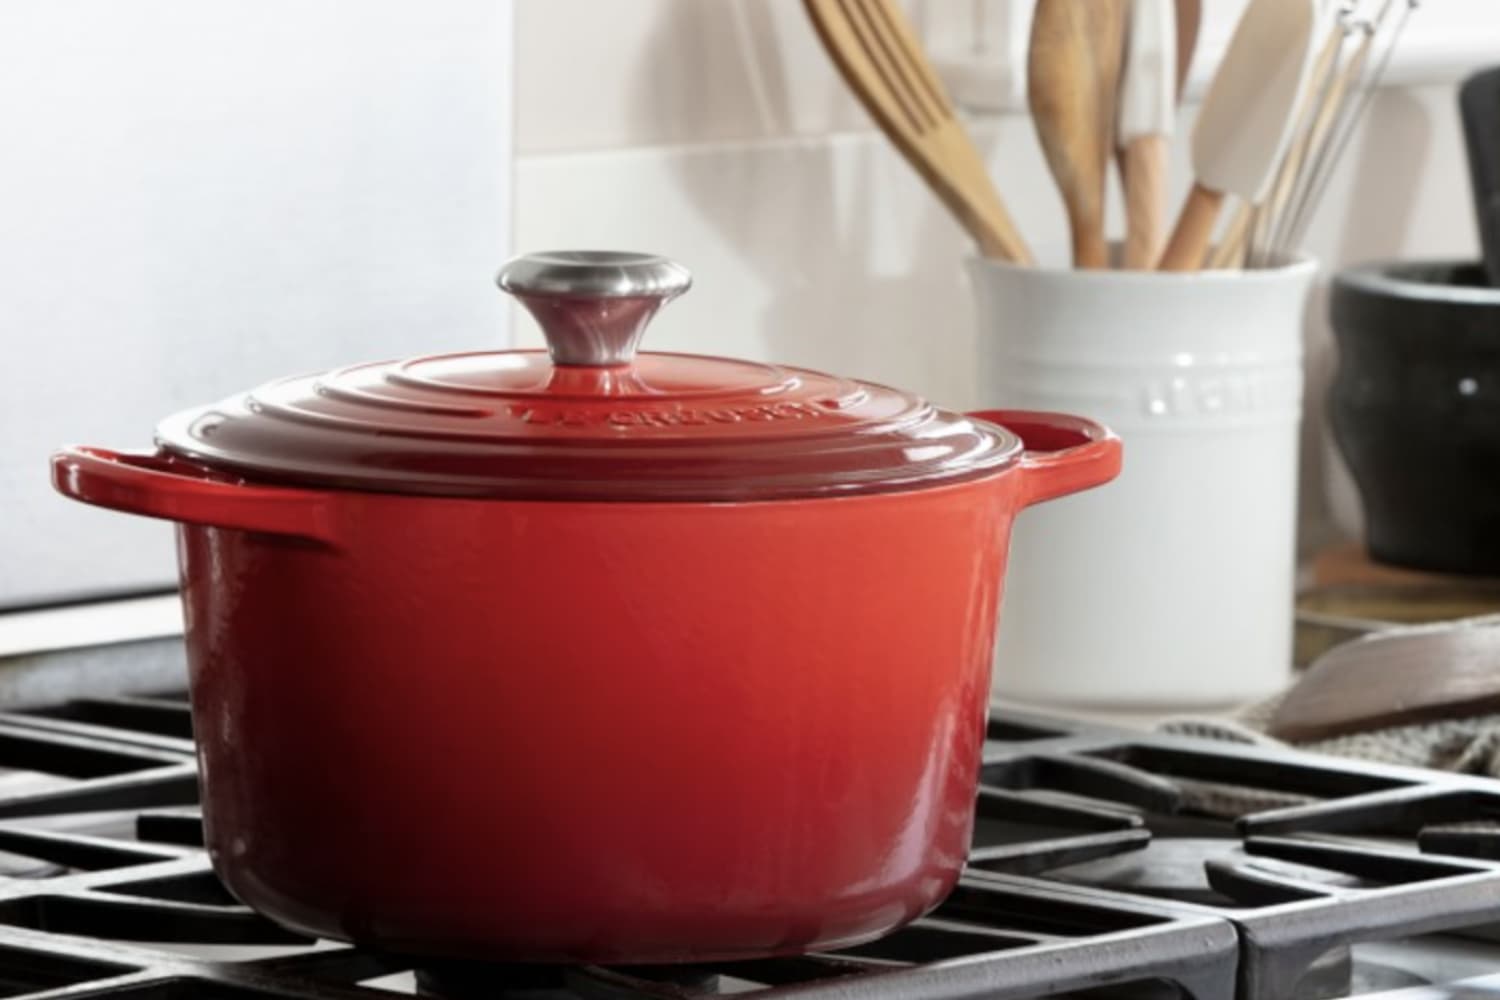 Le Creuset's Winter Sale — 40 to 50 Percent off Dutch Ovens | The Kitchn